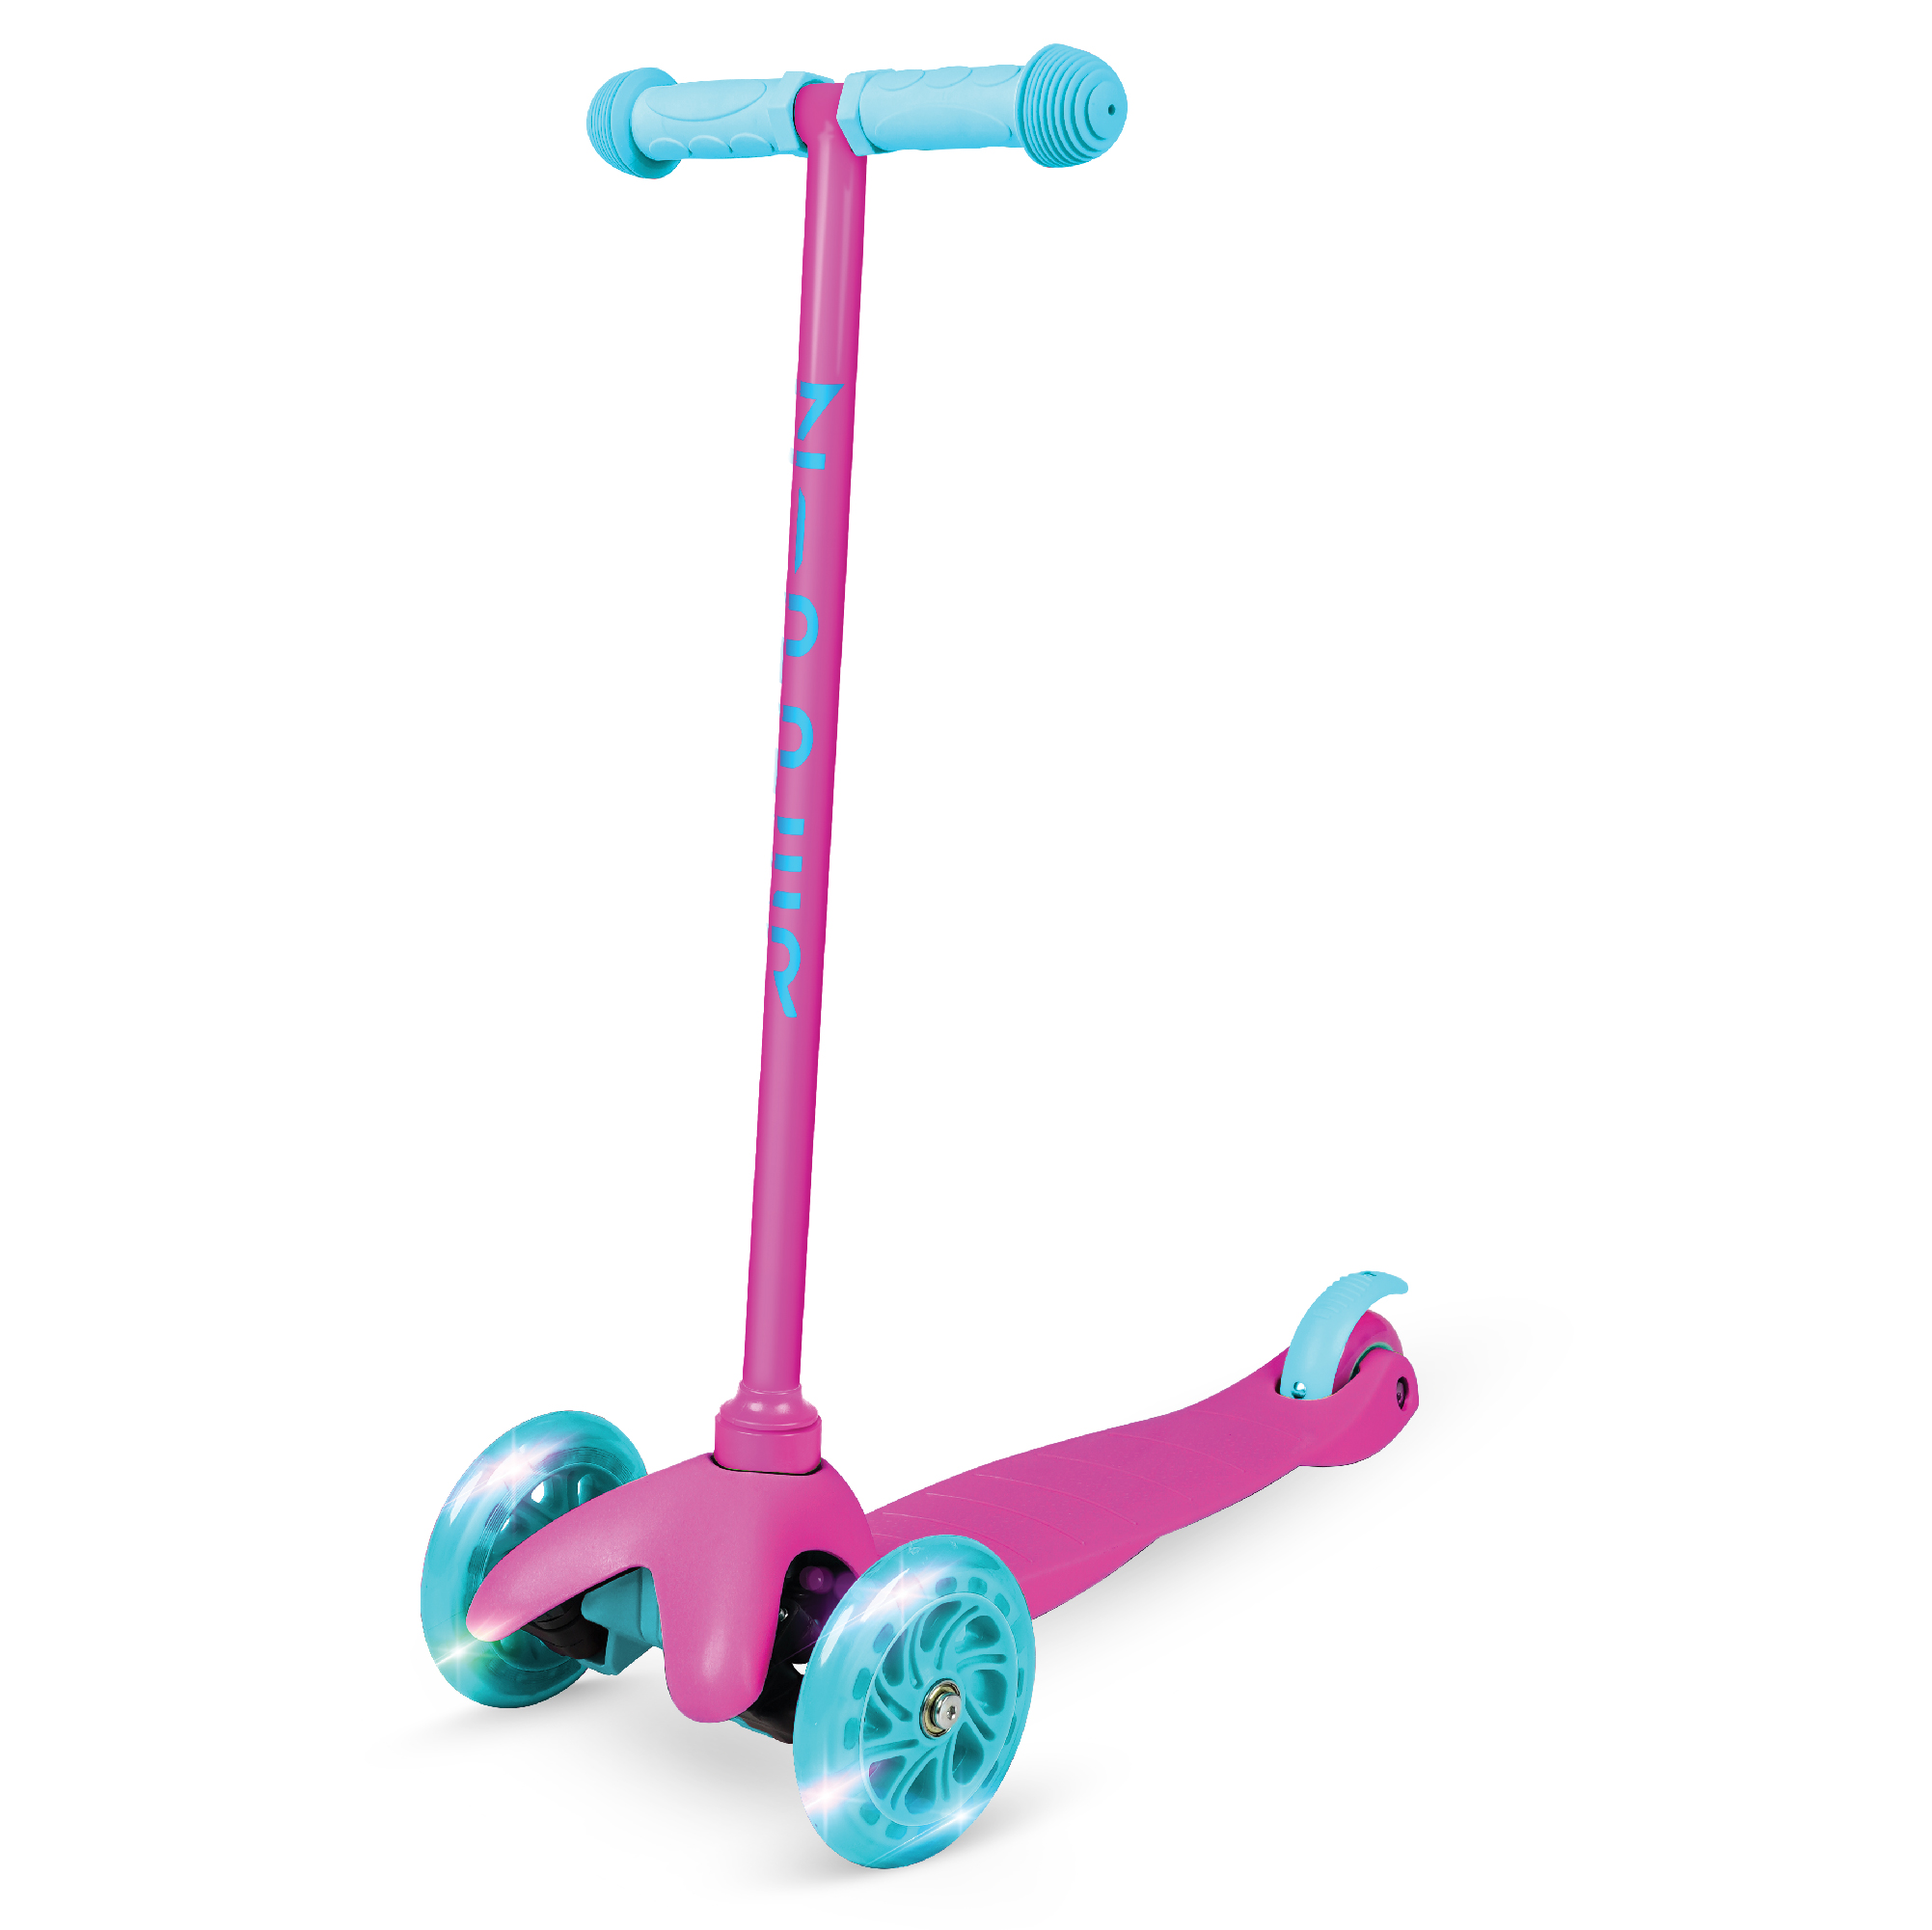 Zycom – Zipper Pink 3 Wheel Scooter with Light Up Wheels – Suits Boys & Girls Ages 3+ - Max Rider Weight 44lbs – 3 Year Manufacturer’s Warranty – Built to Last! - image 1 of 8